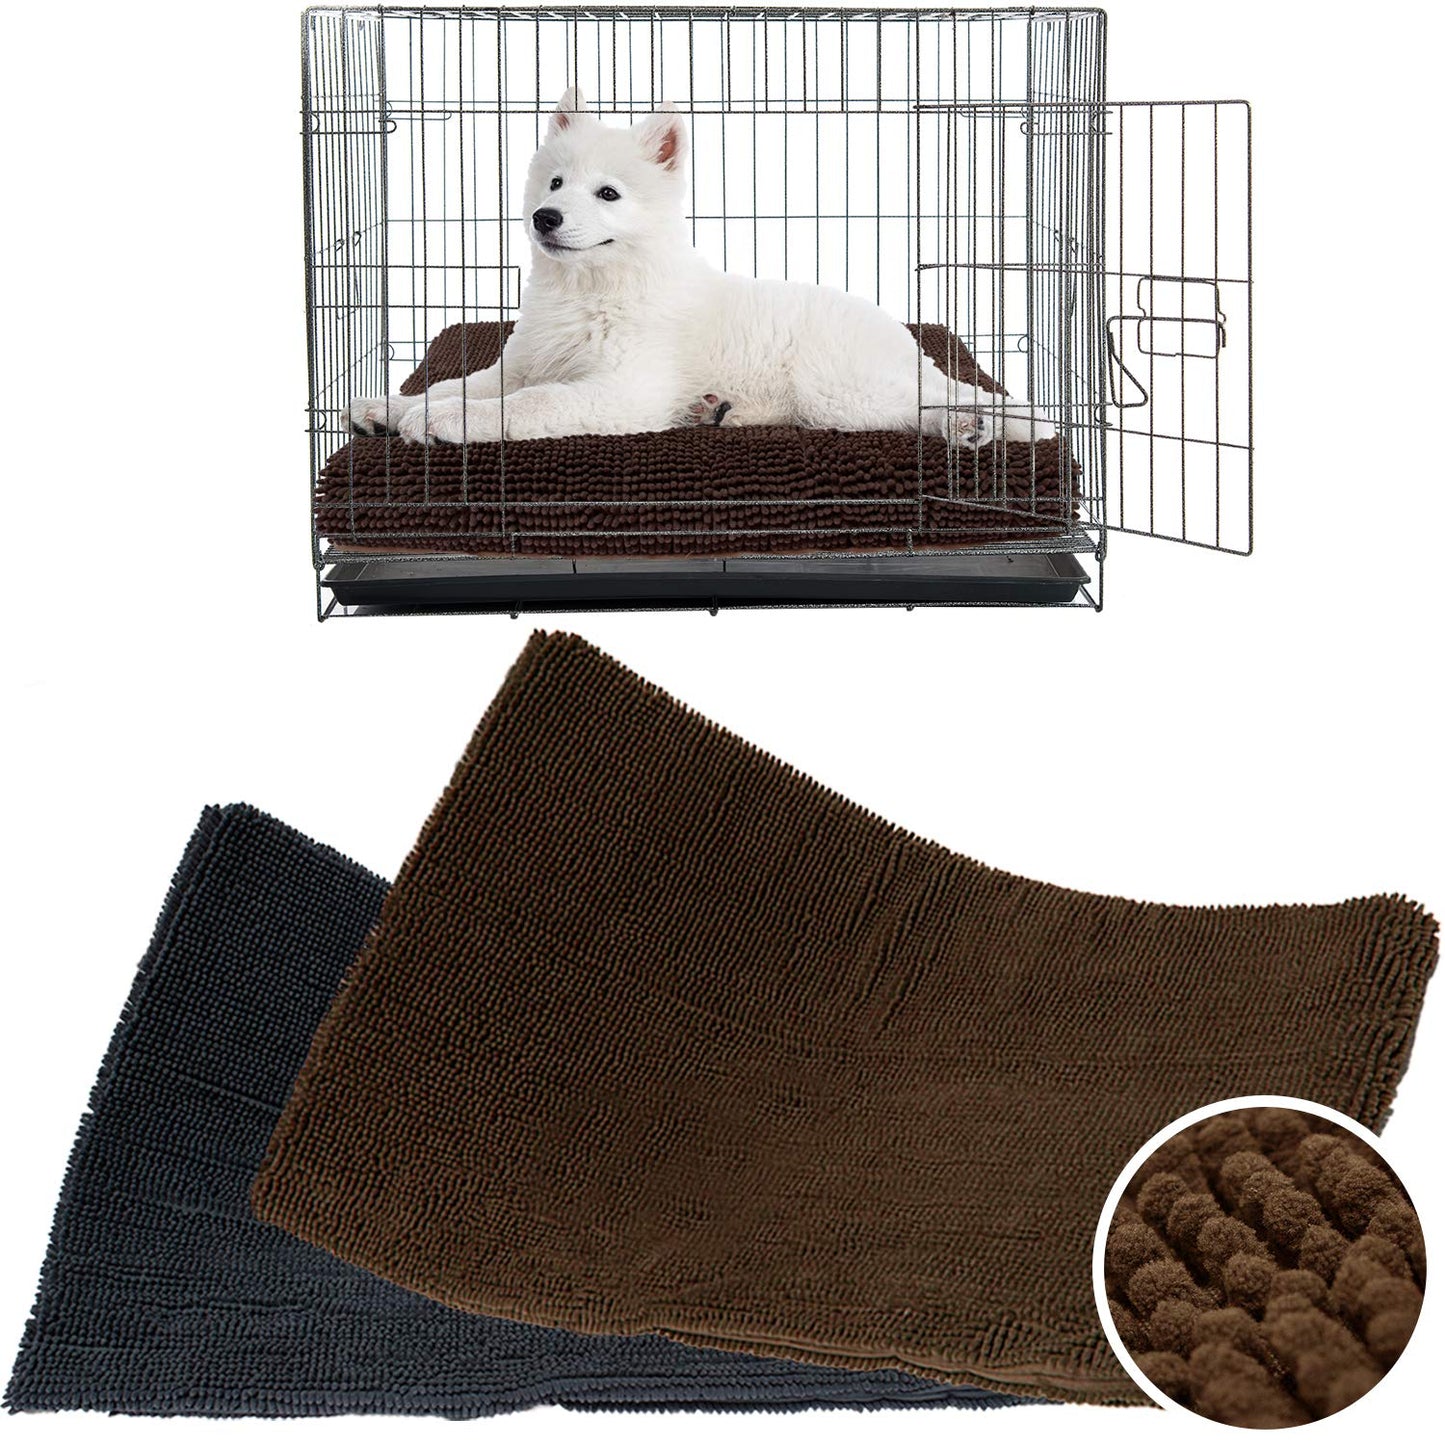 My Doggy Place - Ultra Absorbent Tough Thick Microfiber Chenille Dog Pet Crate Padded Mats for Pets Kennel Pad (Charcoal, Brown) (Sizes: 35x22, 41x27, 47x29)